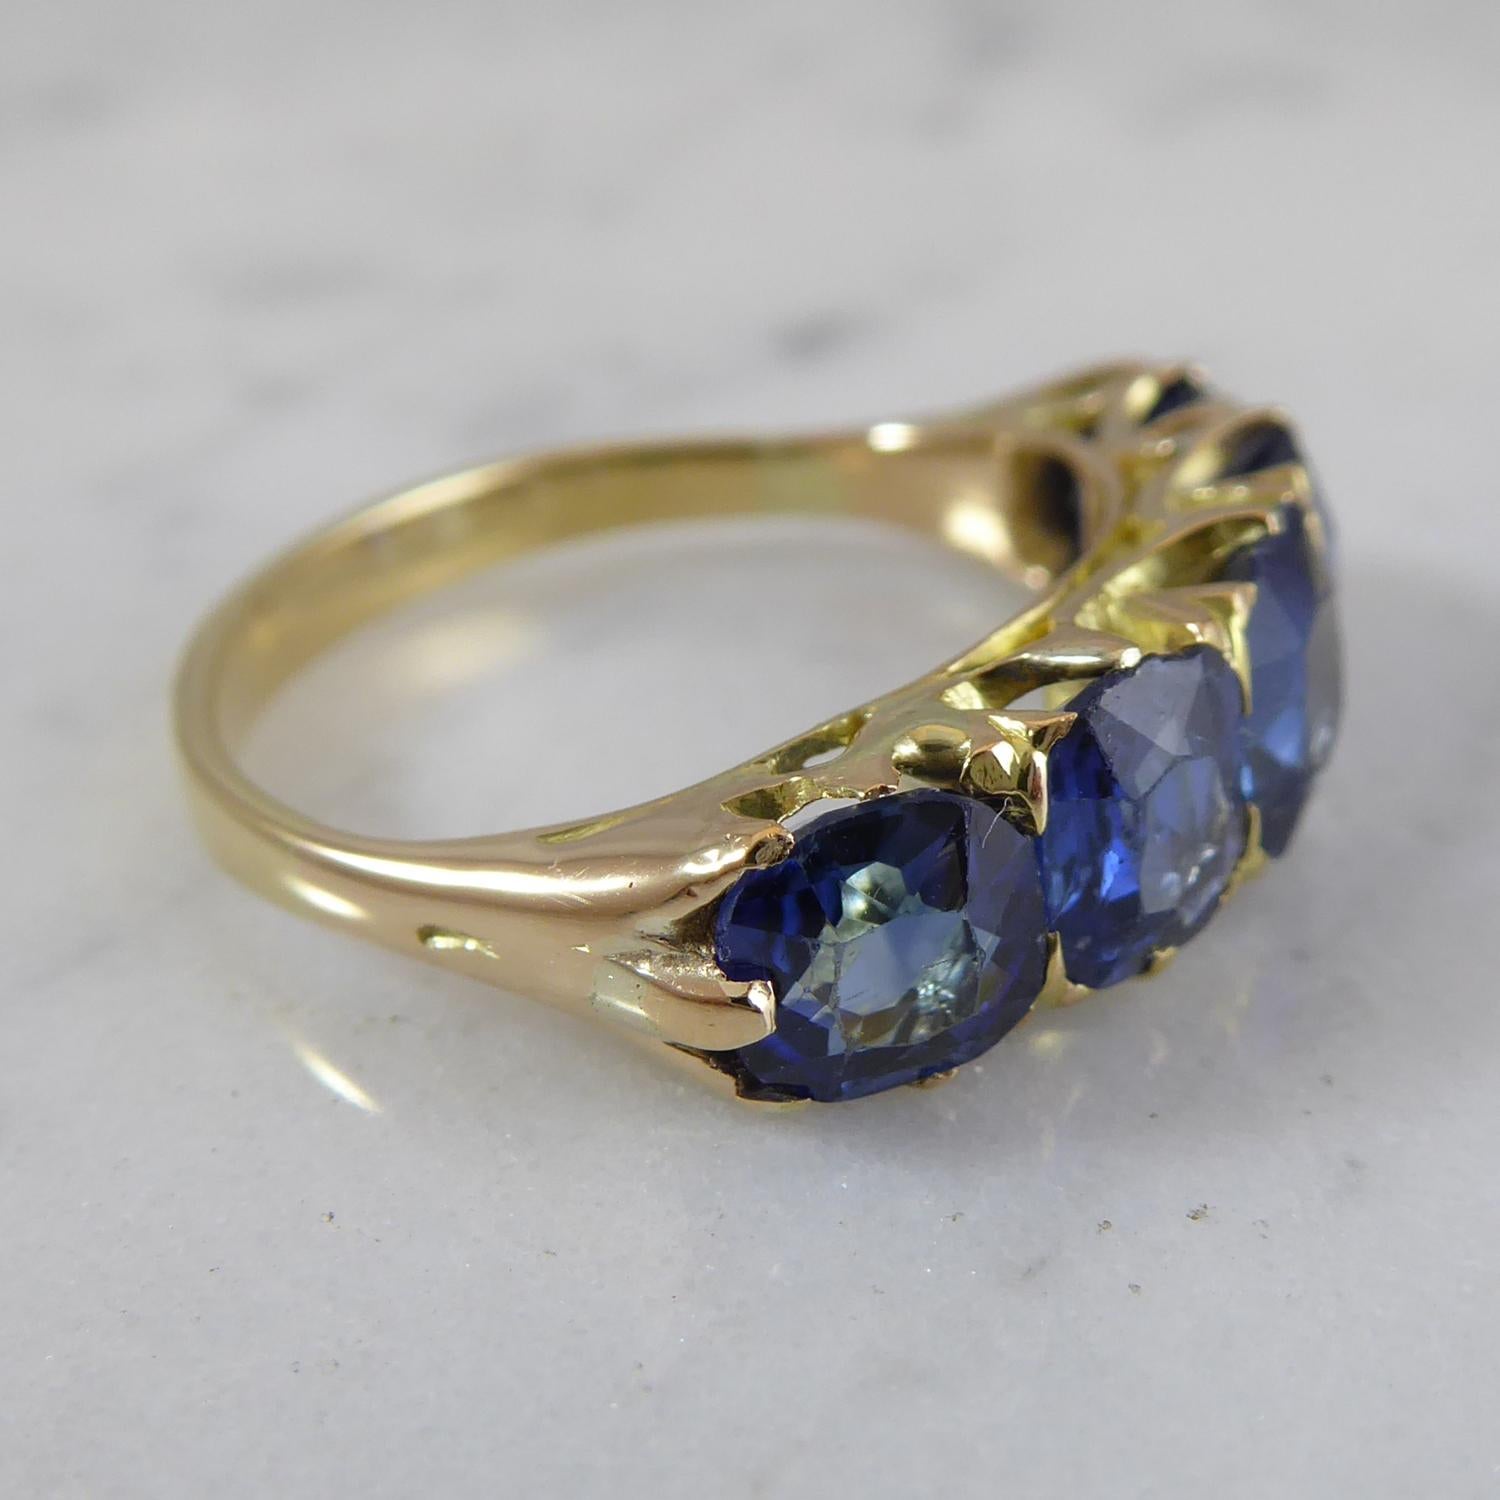 A five stone diamond ring dating from the late Victorian era.  Set with five graduated cushion cut sapphires of good colour in yellow claw settings to a plain polished band.  Not hallmarked.  Finger size 6 (US/Canada), M (UK/Australia) with some